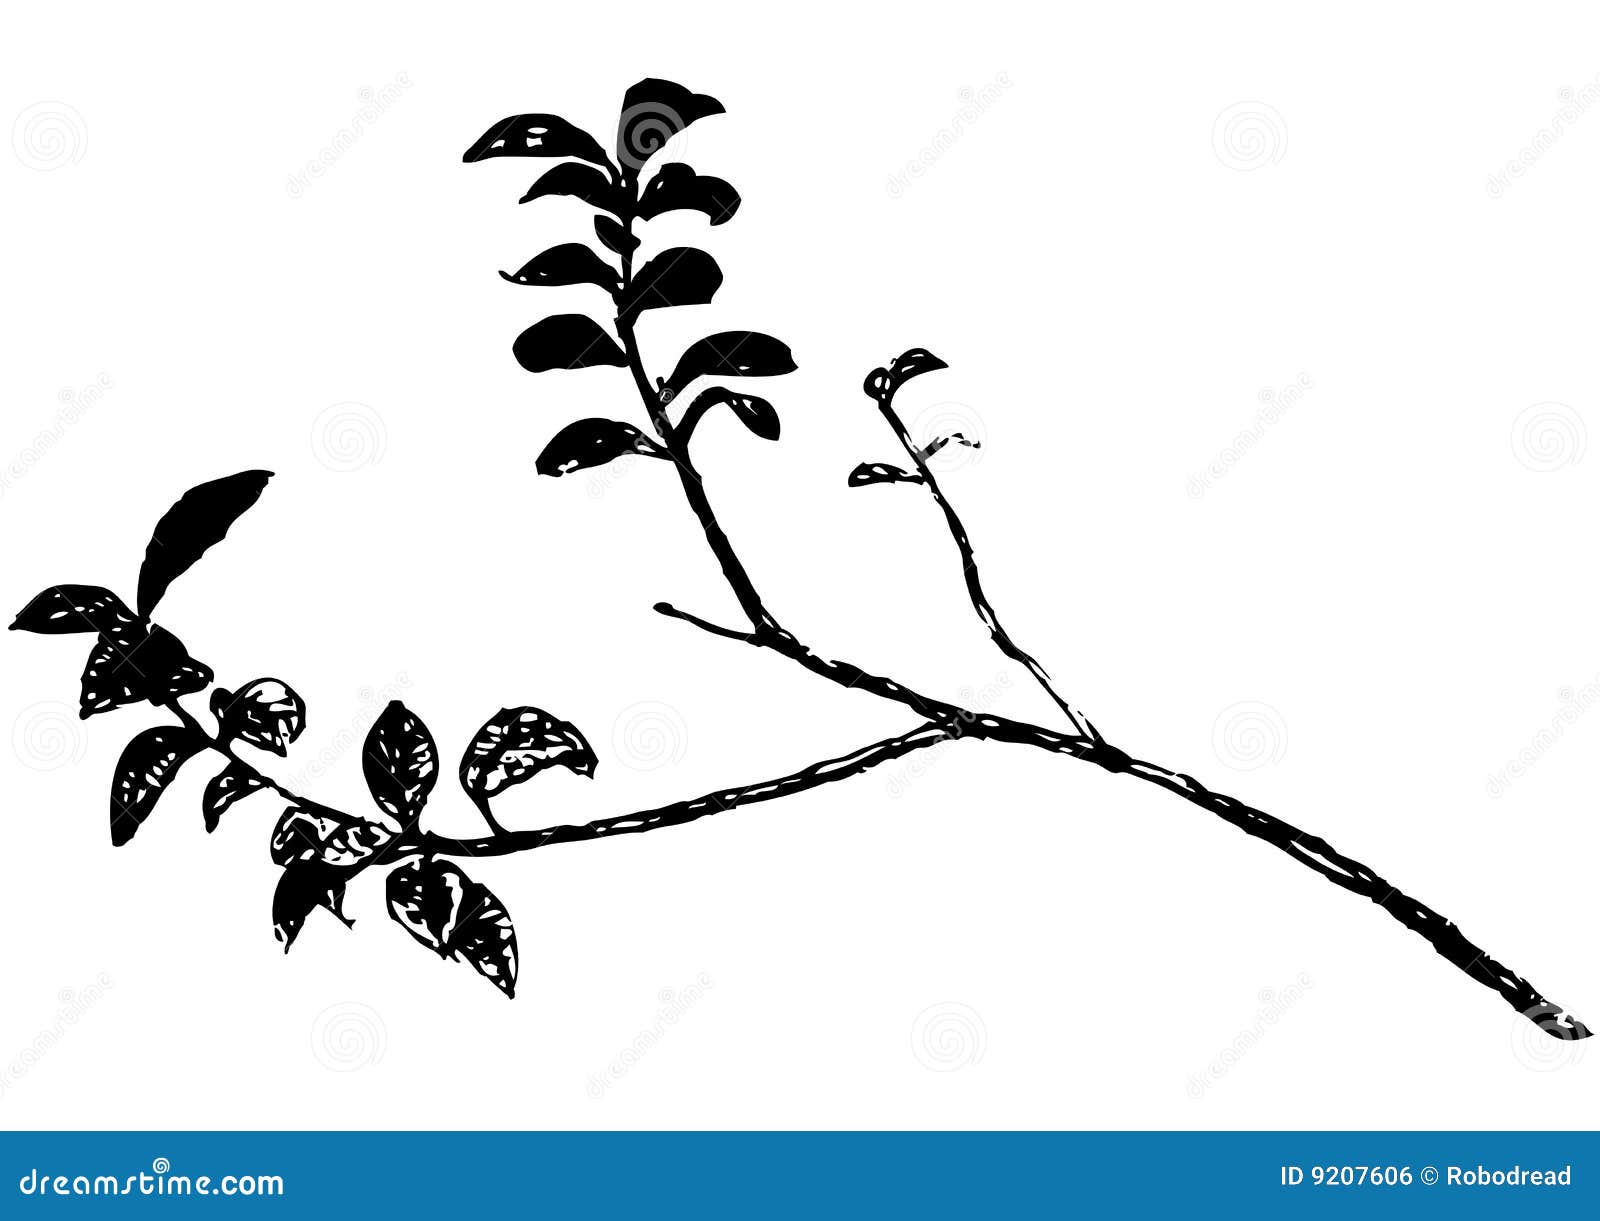 Branch (vector) Royalty Free Stock Image - Image: 9207606